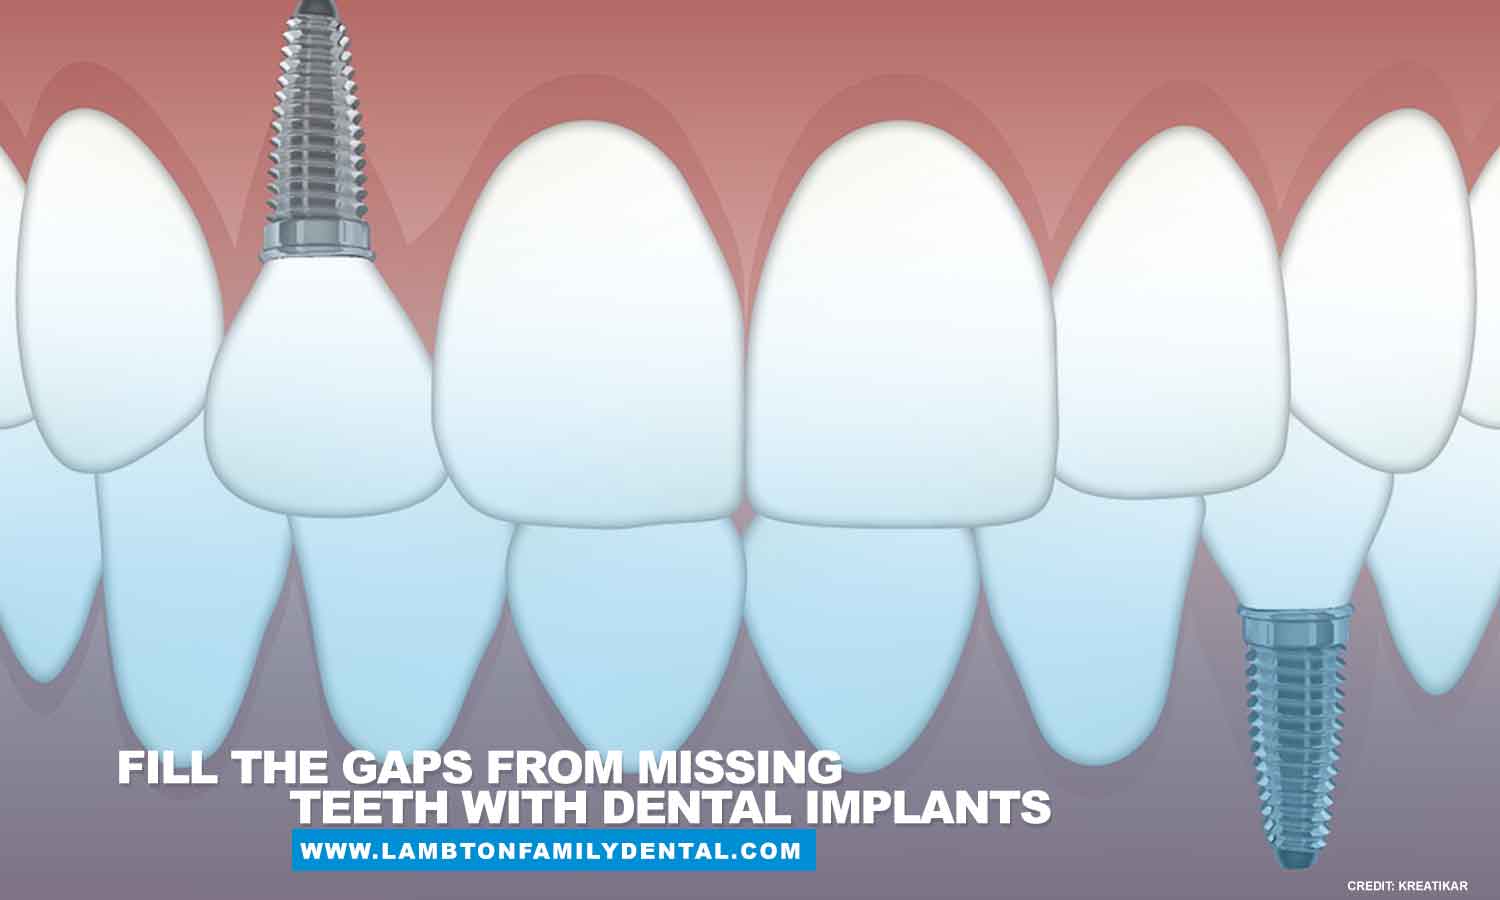 Fill the gaps from missing teeth